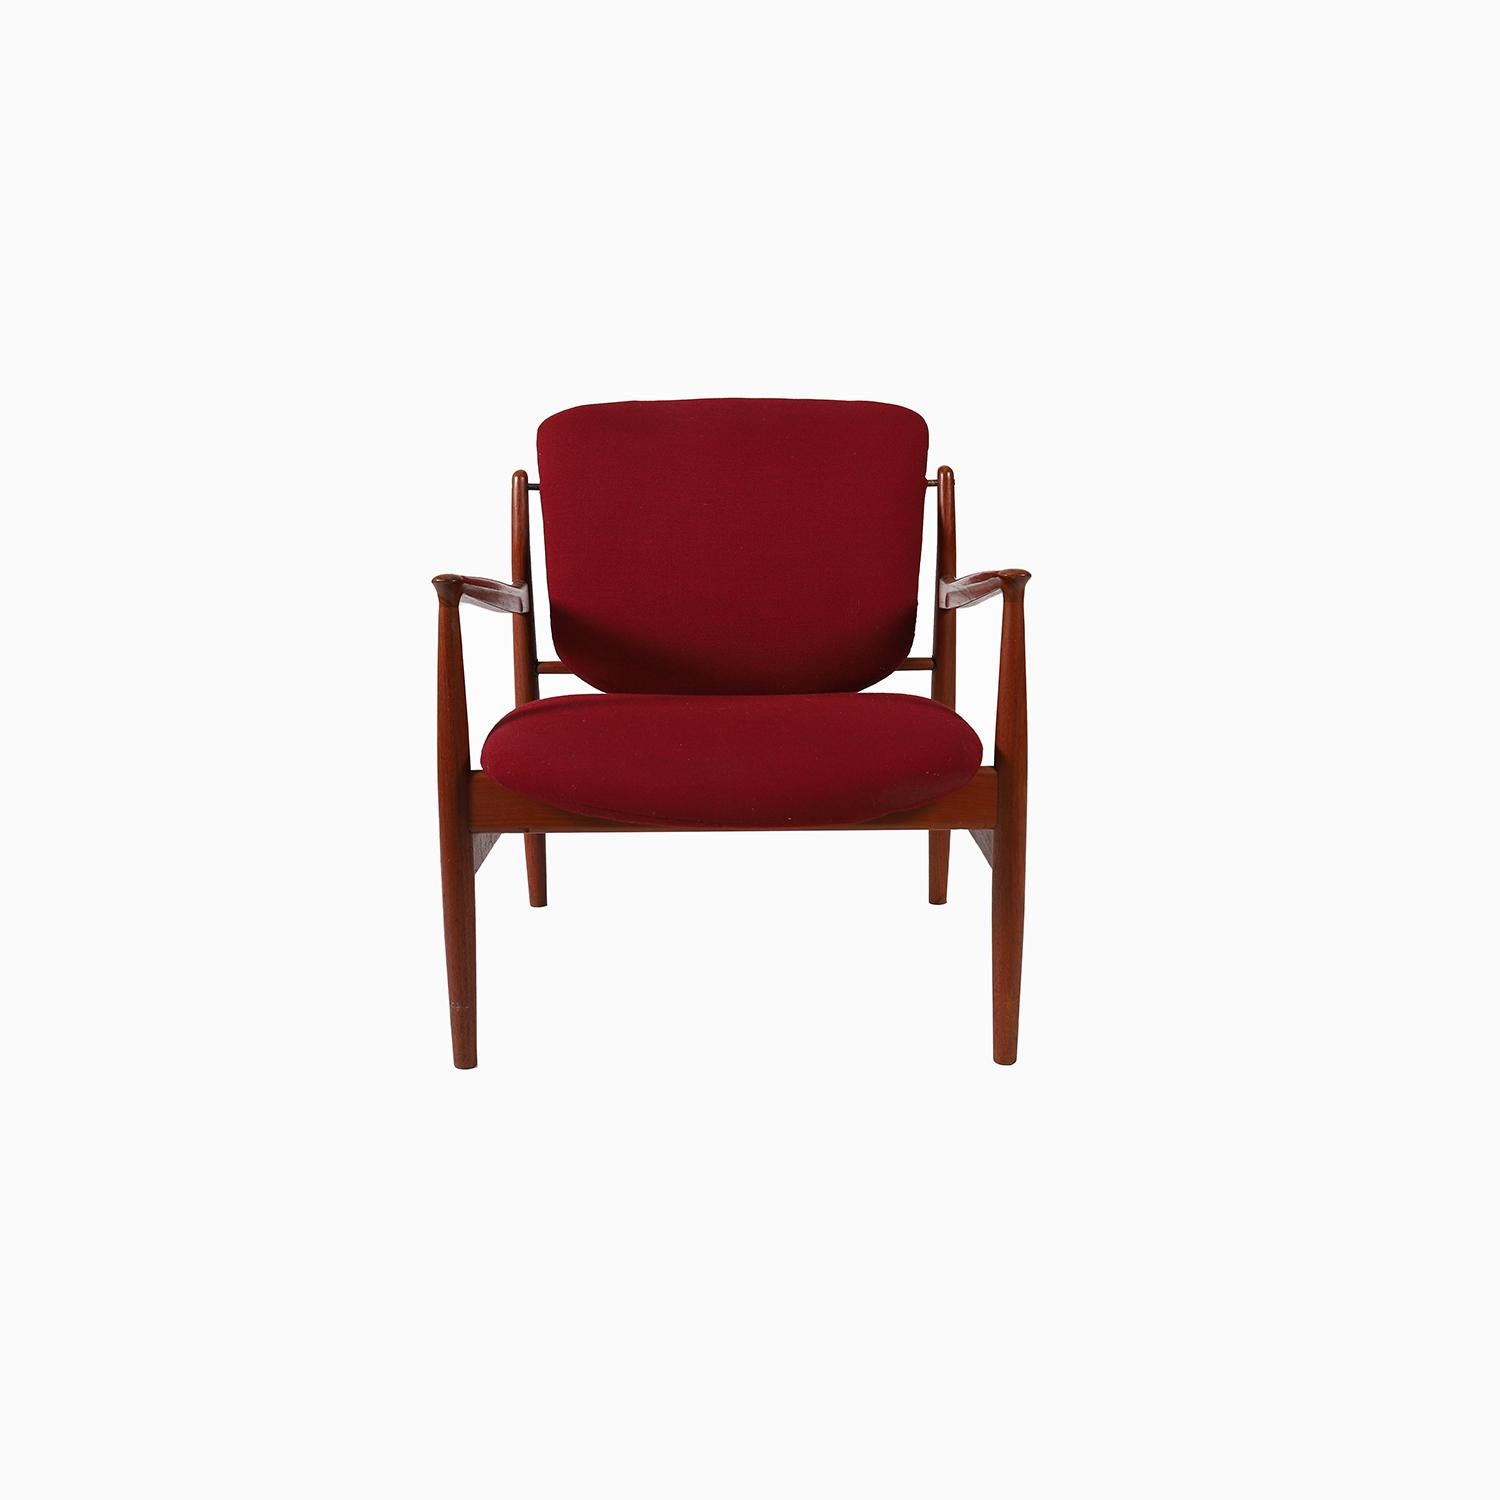 
the france lounge was designed by Finn Juhl in the 1950's and produced in Denmark by France & Daverkorsen.  this chair is an earlier example of the design and it is in excellent condition.  the sculptural armrests taper to 'knife edge' exterior